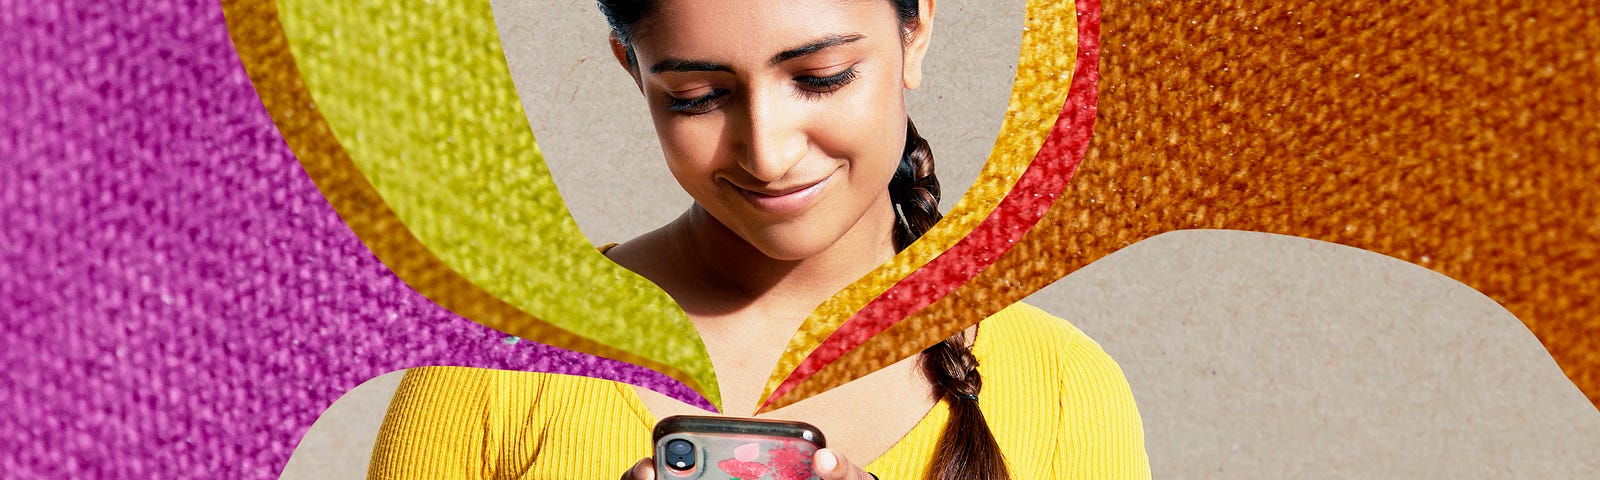 Collage of a South Asian person with their hair in one low side braid typing on a phone. Multicolored swirls of woven fabric texture fly out of the phone.